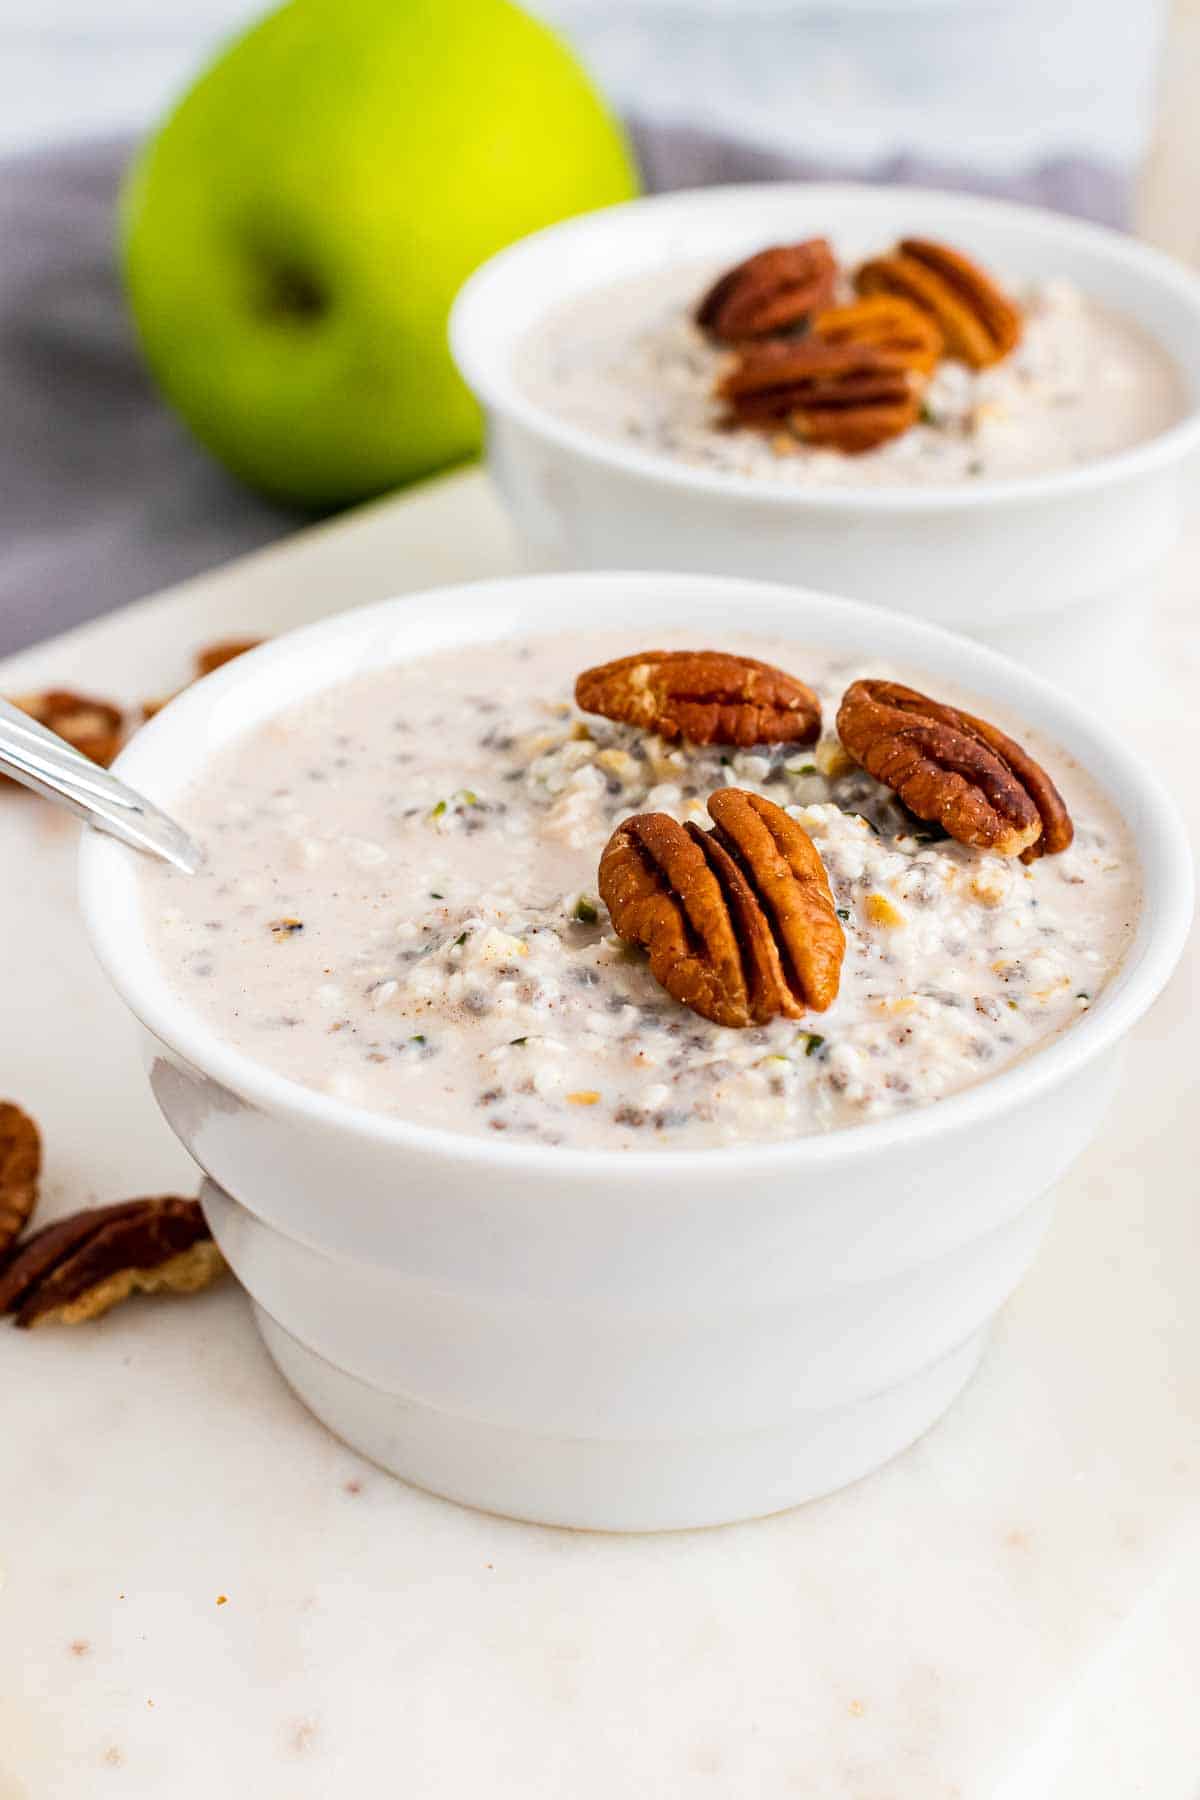 Finished oats topped with pecans in two white bowls on a white serving tray